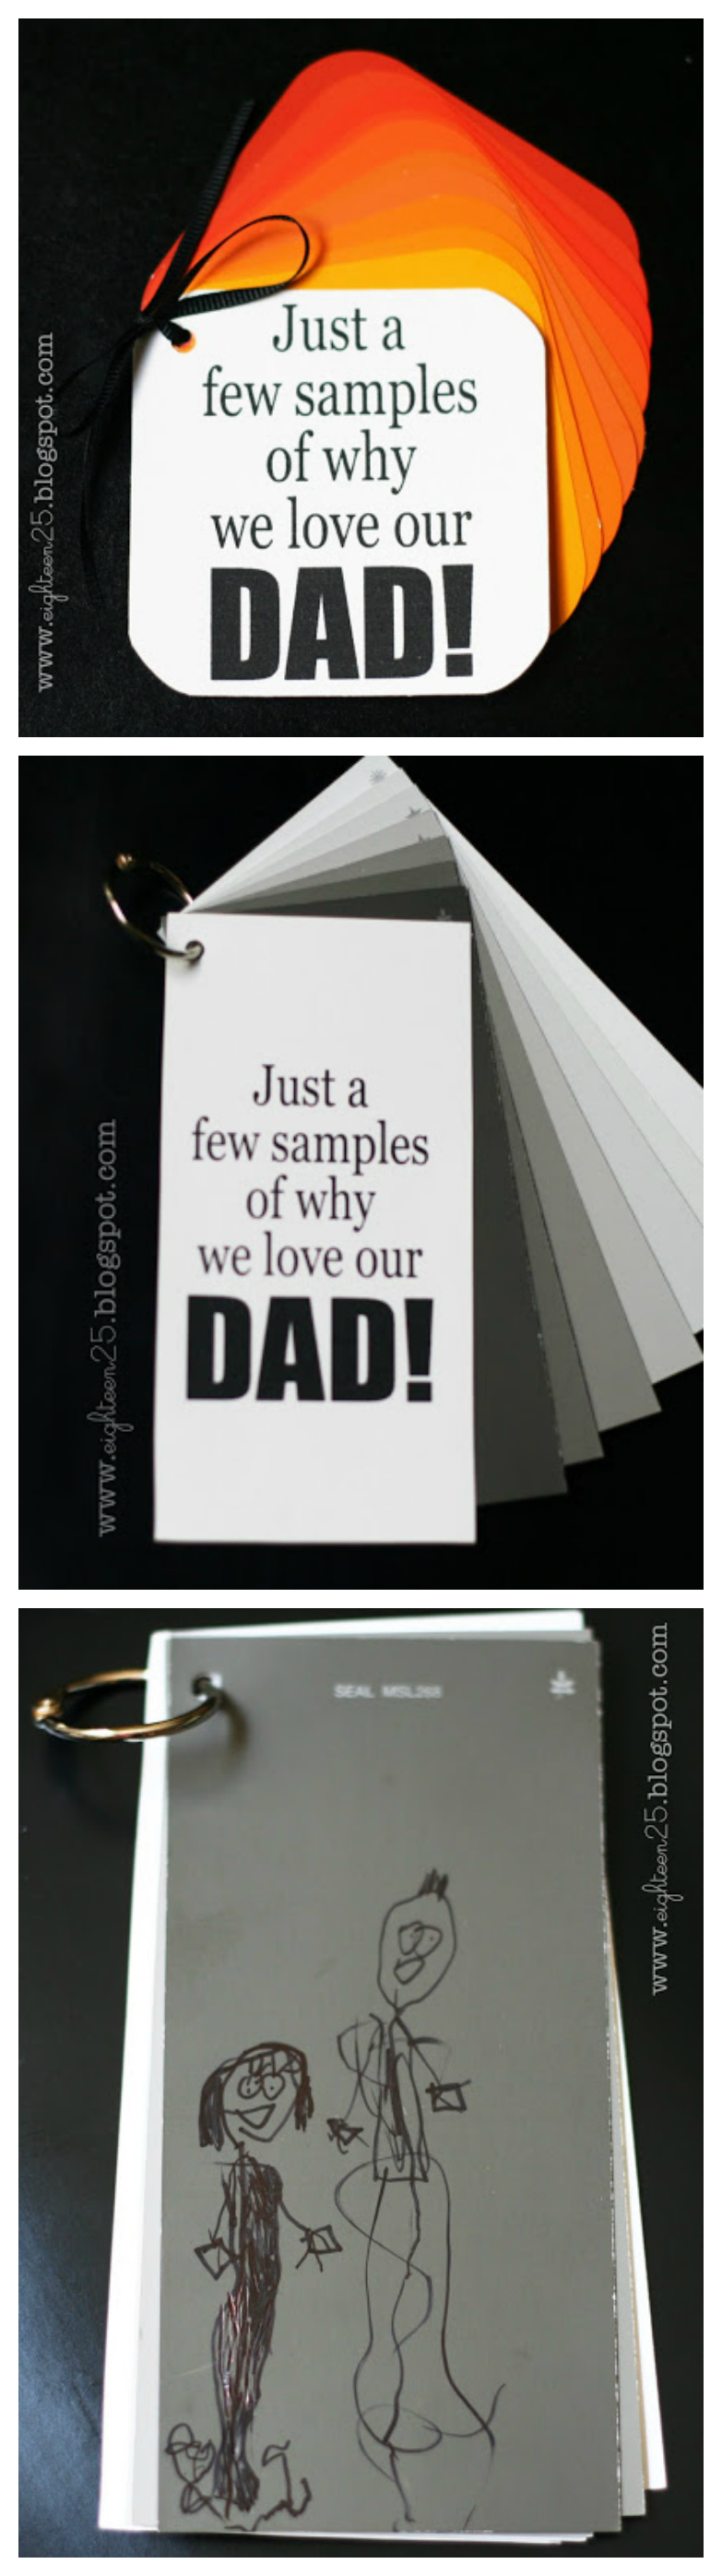 Just a few samples of why we love our Dad! | Such a sweet gift idea using paint sample cards